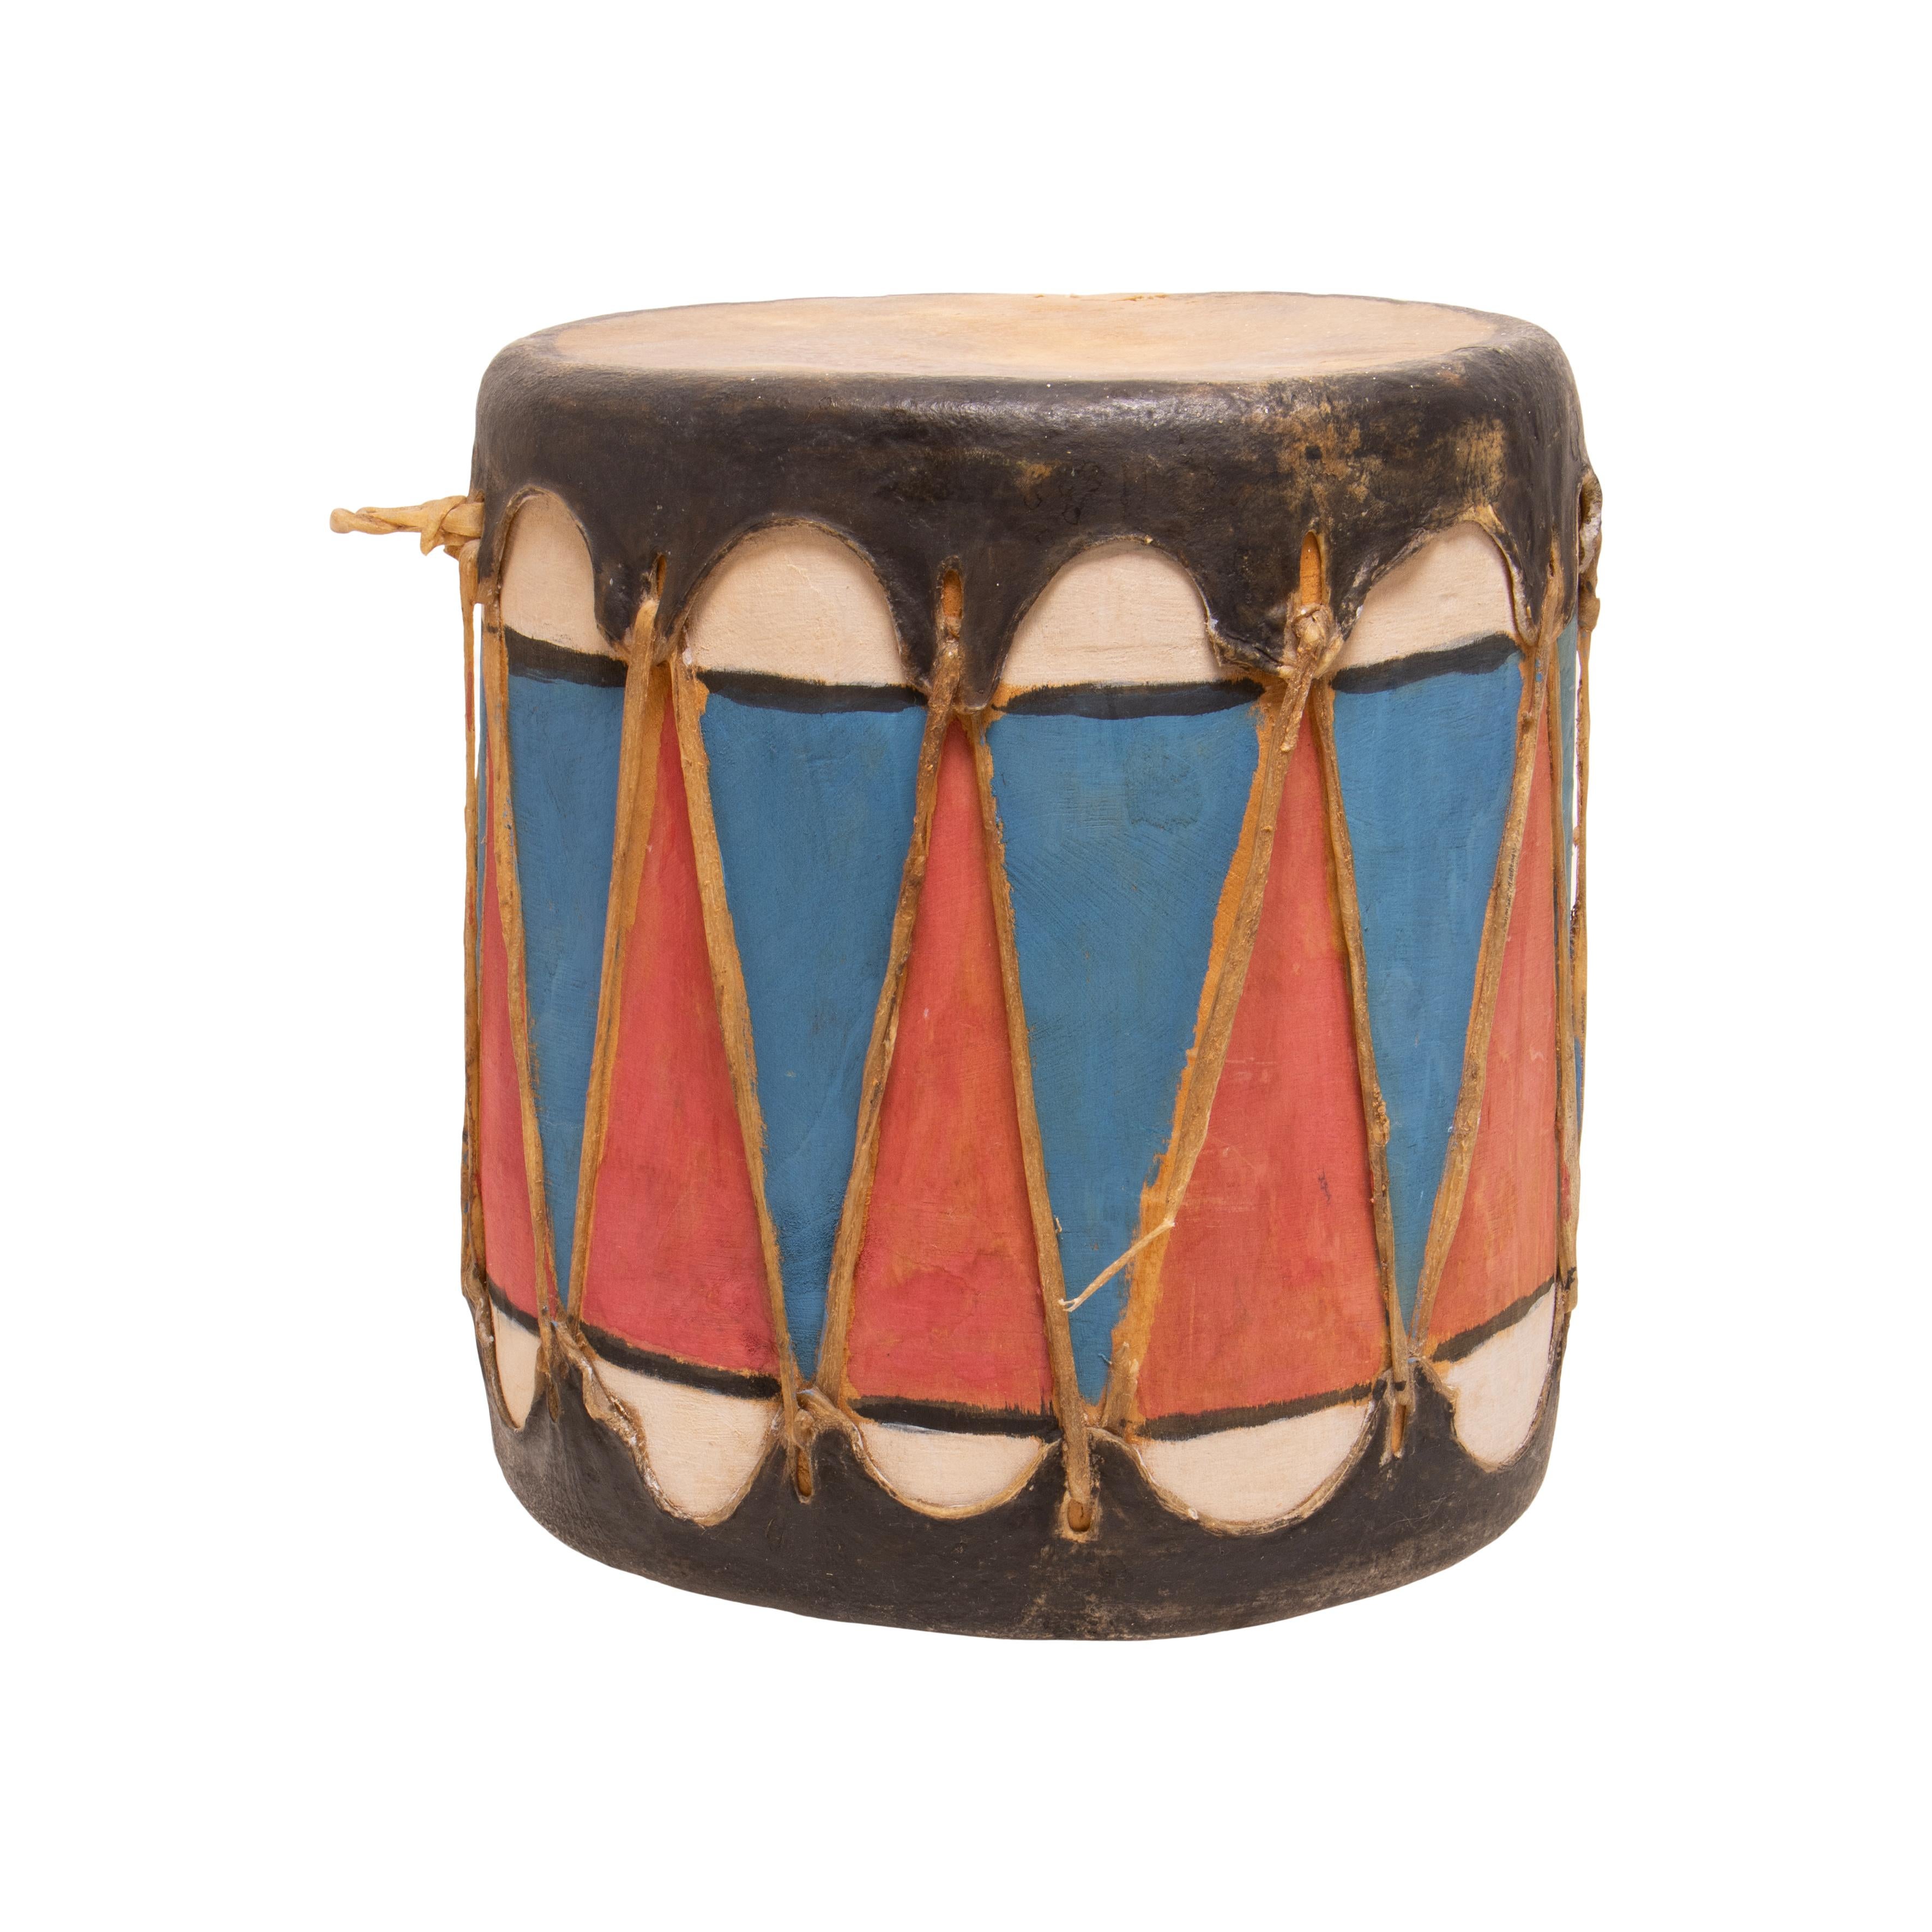 Native American Cochiti drum with sides painted in red, white and blue with black stripes. Made of wood and hide. 

Period: Early 20th century

Origin: Southwest, Cochiti

Size: 10